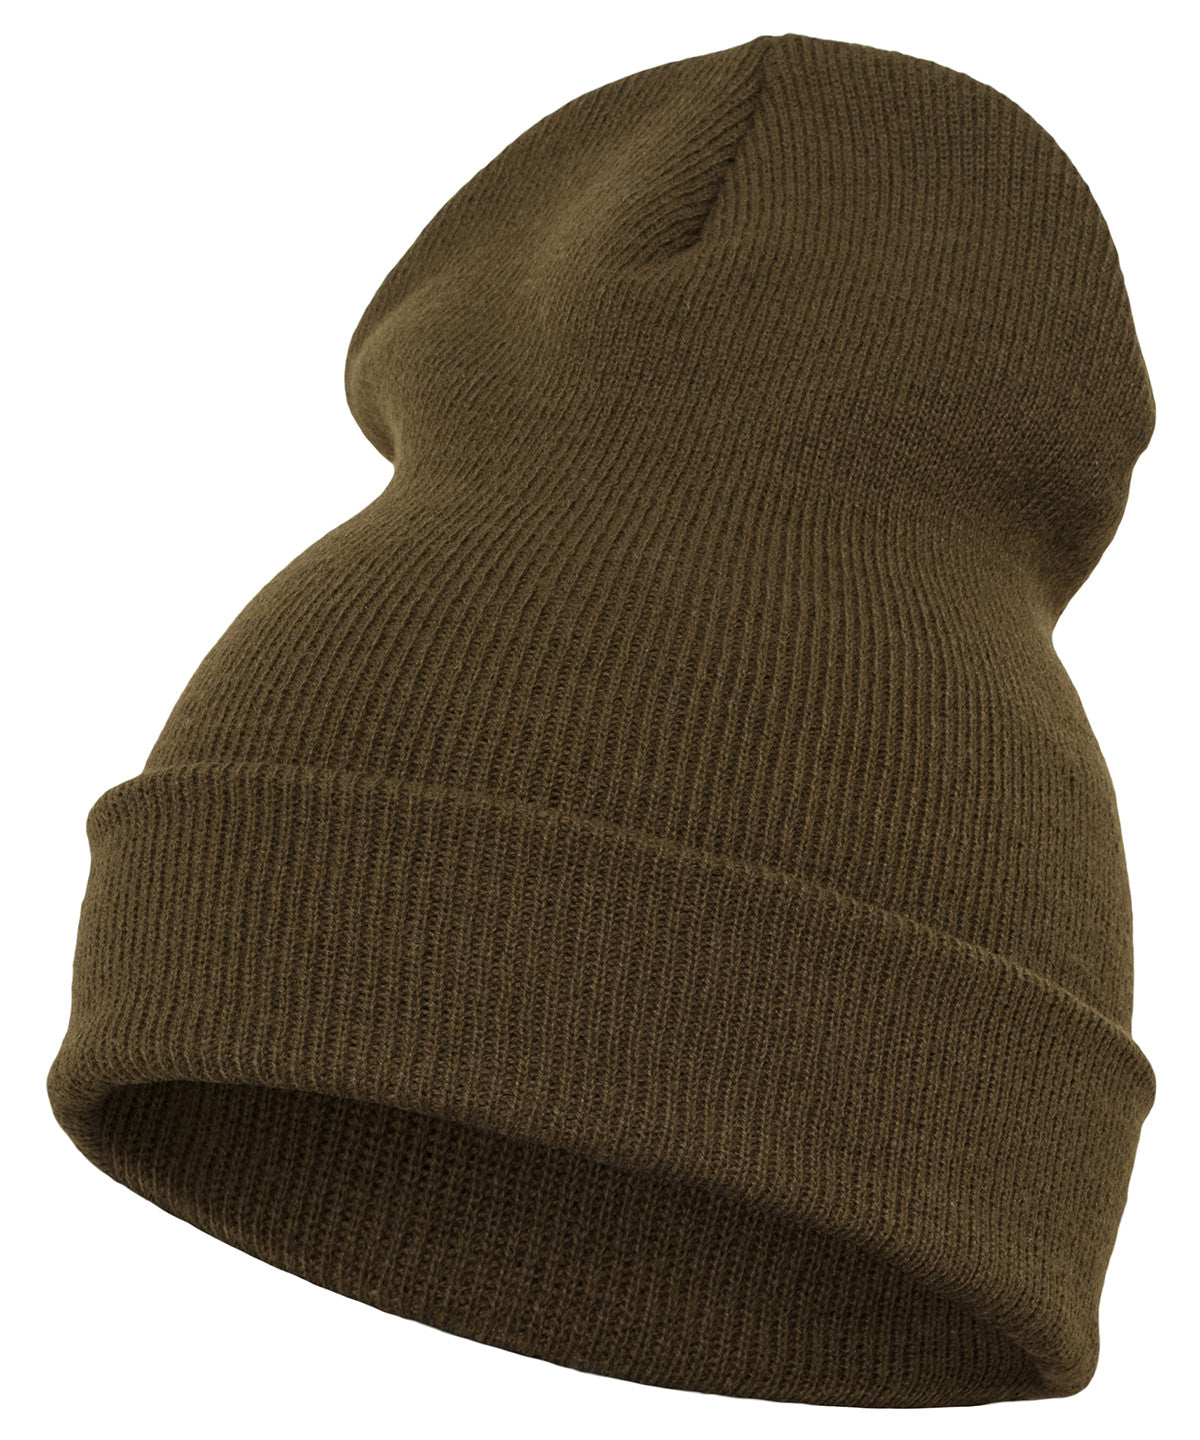 Olive - Heavyweight long beanie (1501KC) Hats Flexfit by Yupoong Headwear, Must Haves, New Colours for 2023, Winter Essentials Schoolwear Centres